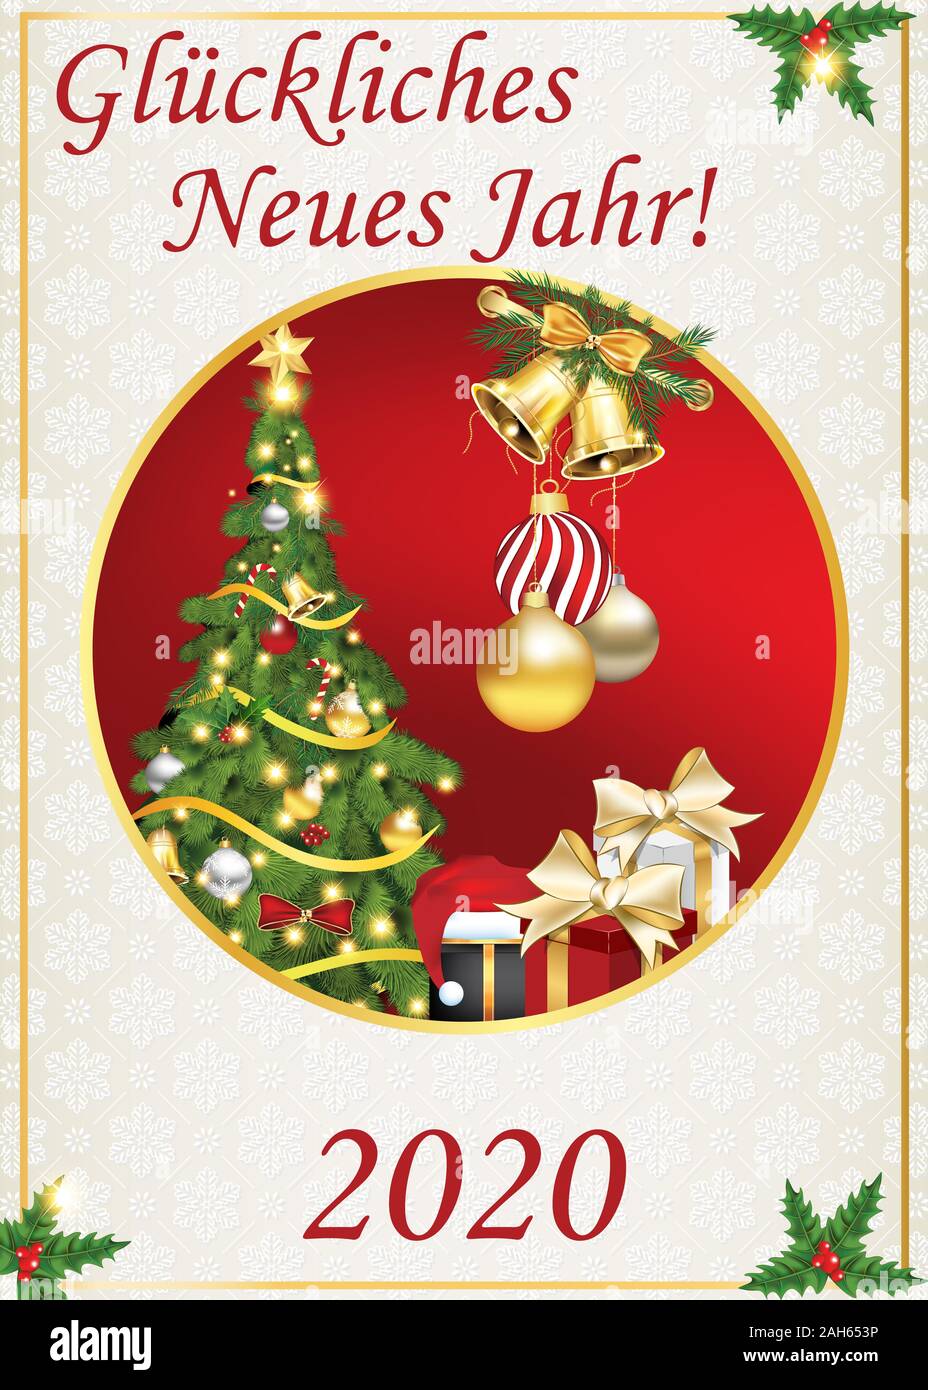 Happy New Year 2020! written in German. Greeting card with vintage design: a Christmas tree, presents boxes, baubles, jingle bells on a red background Stock Photo